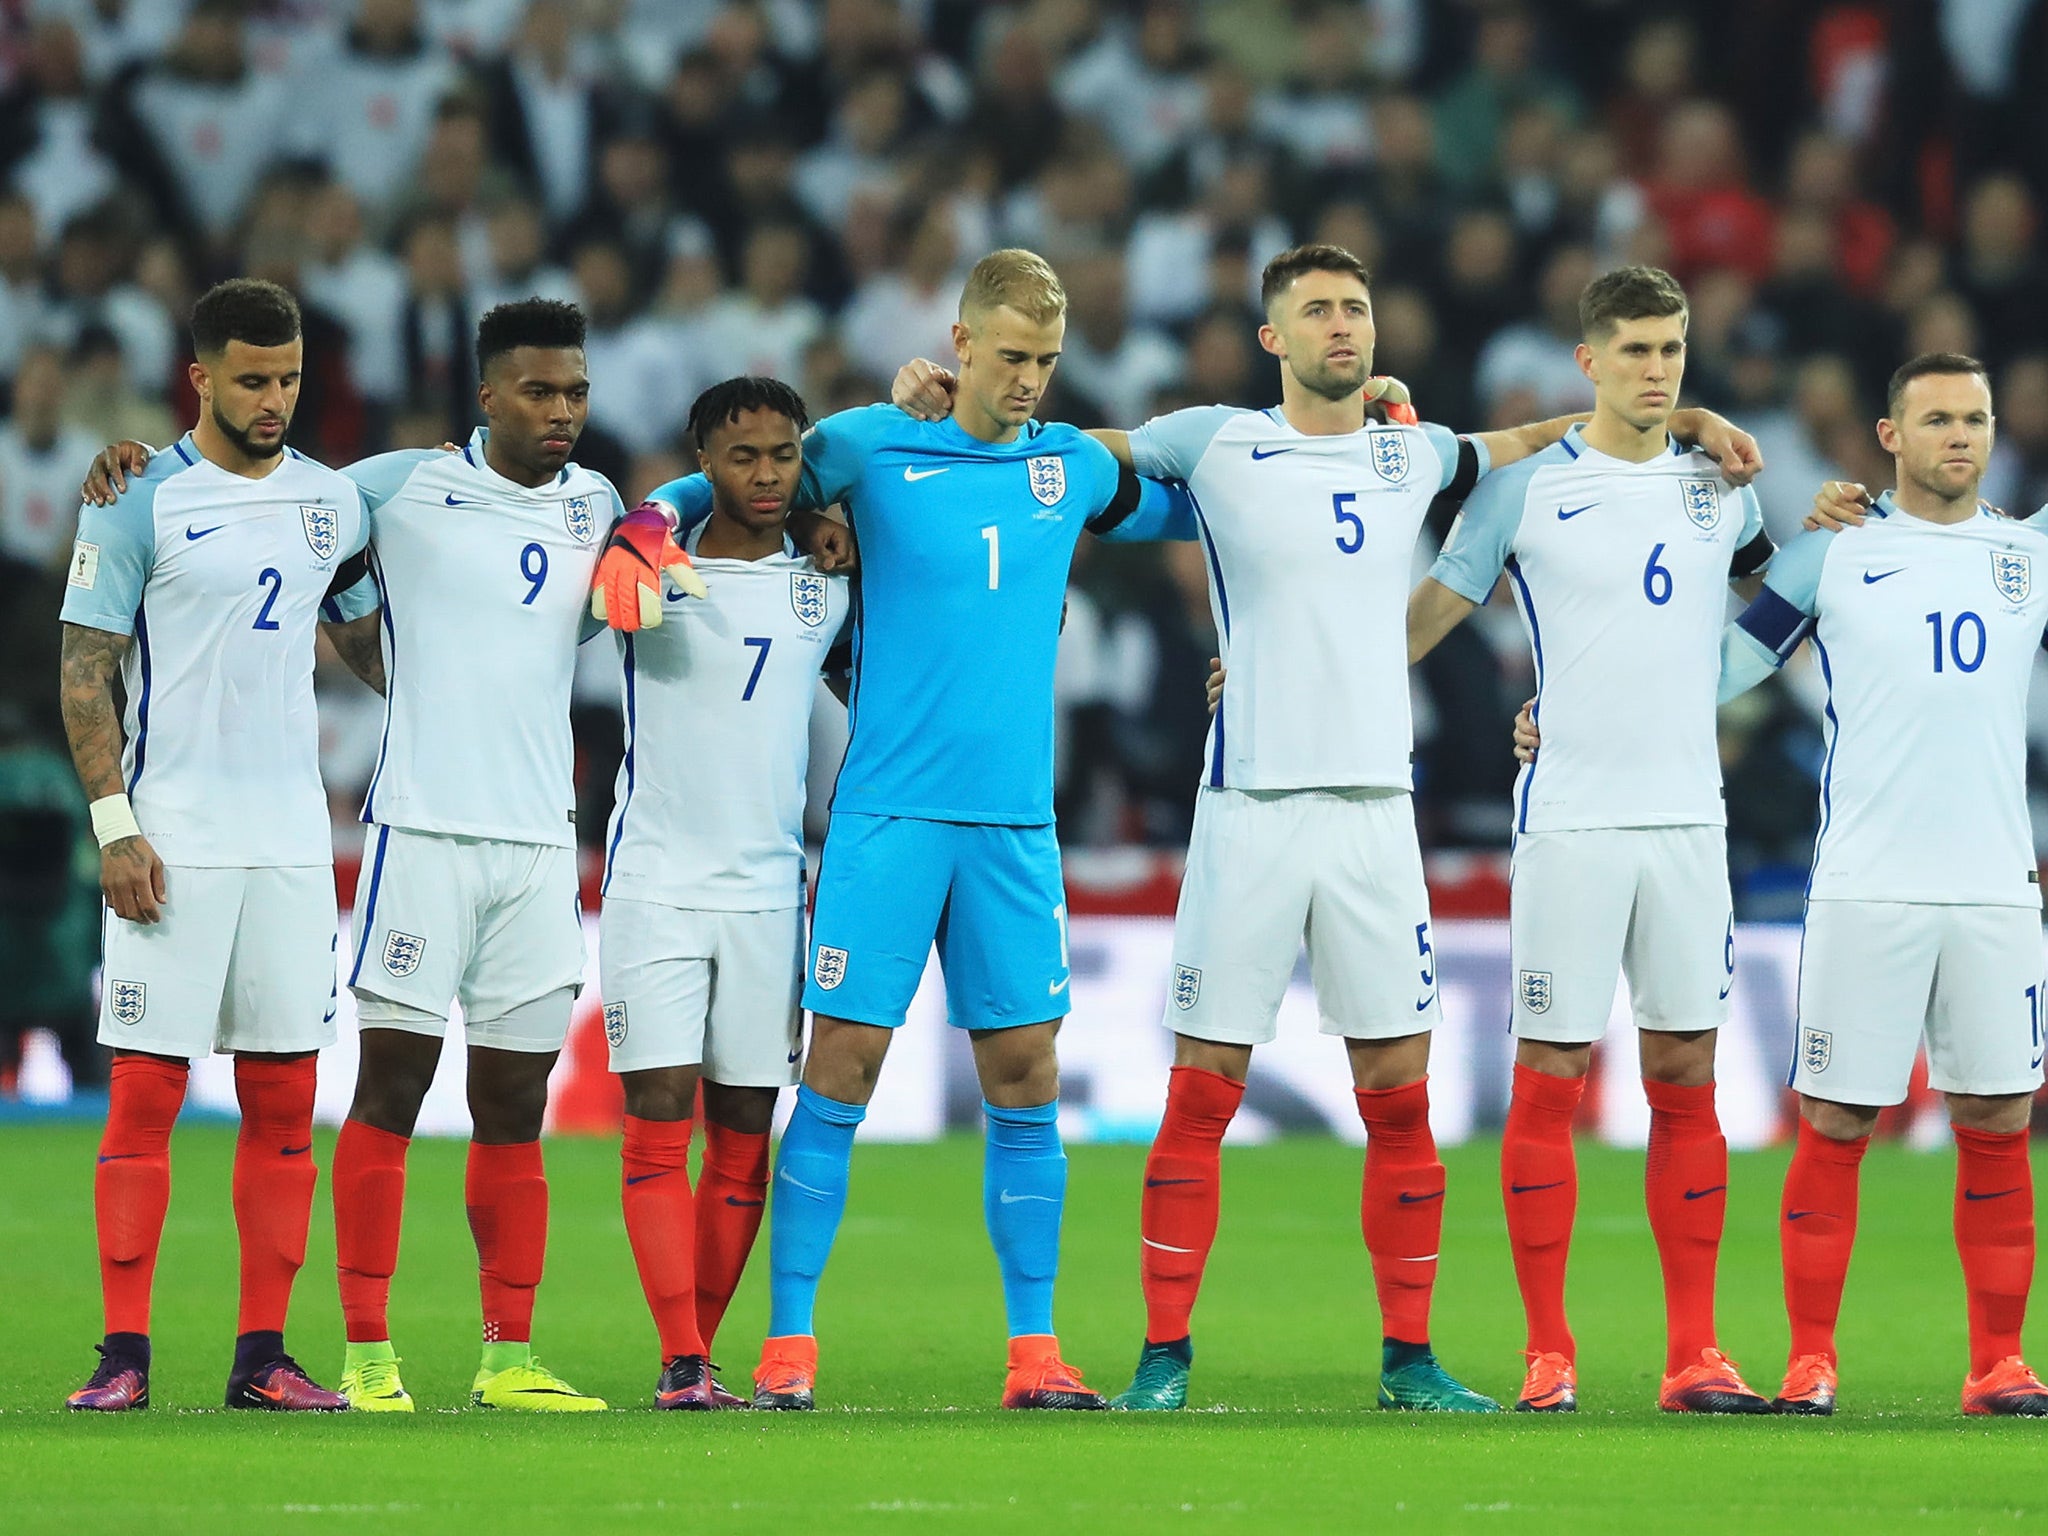 England's player will 'recognise' those affected by Wednesday's attack in central London